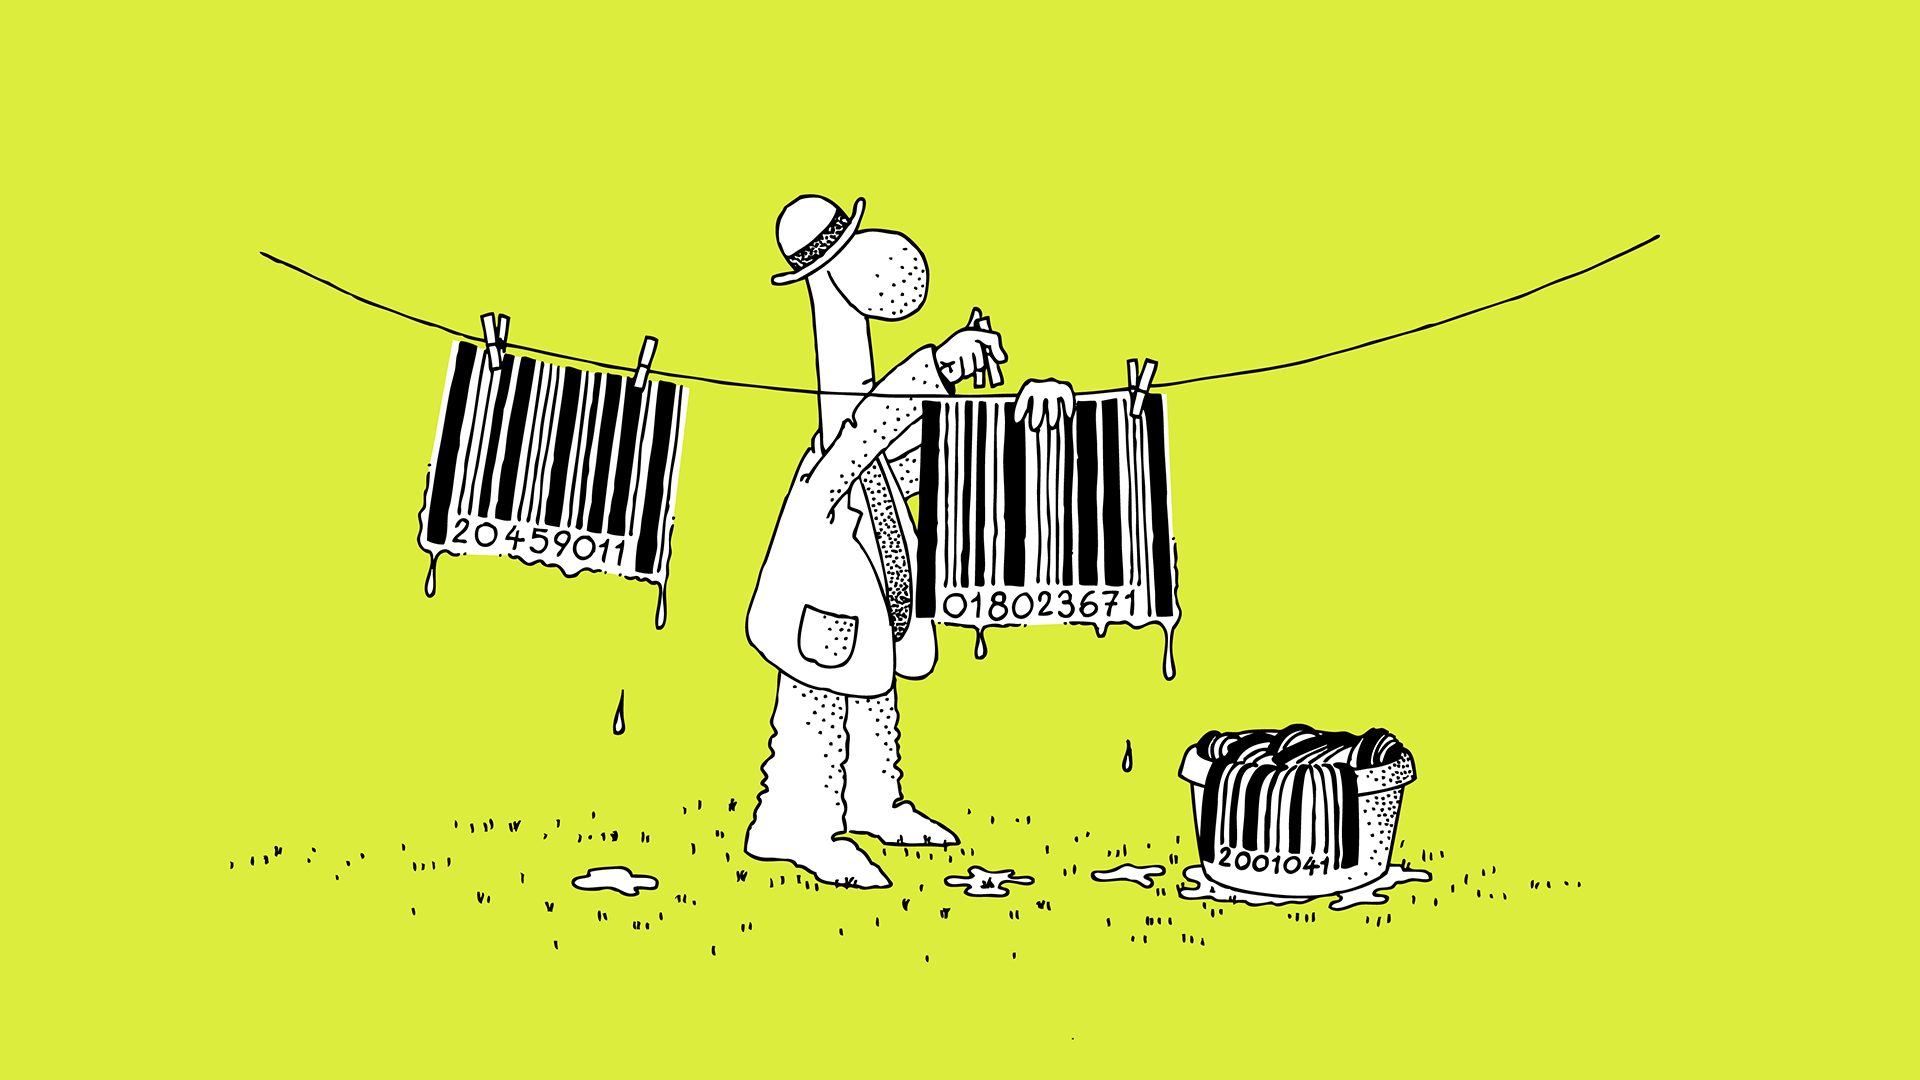 Cartoon of a man hanging barcodes to dry